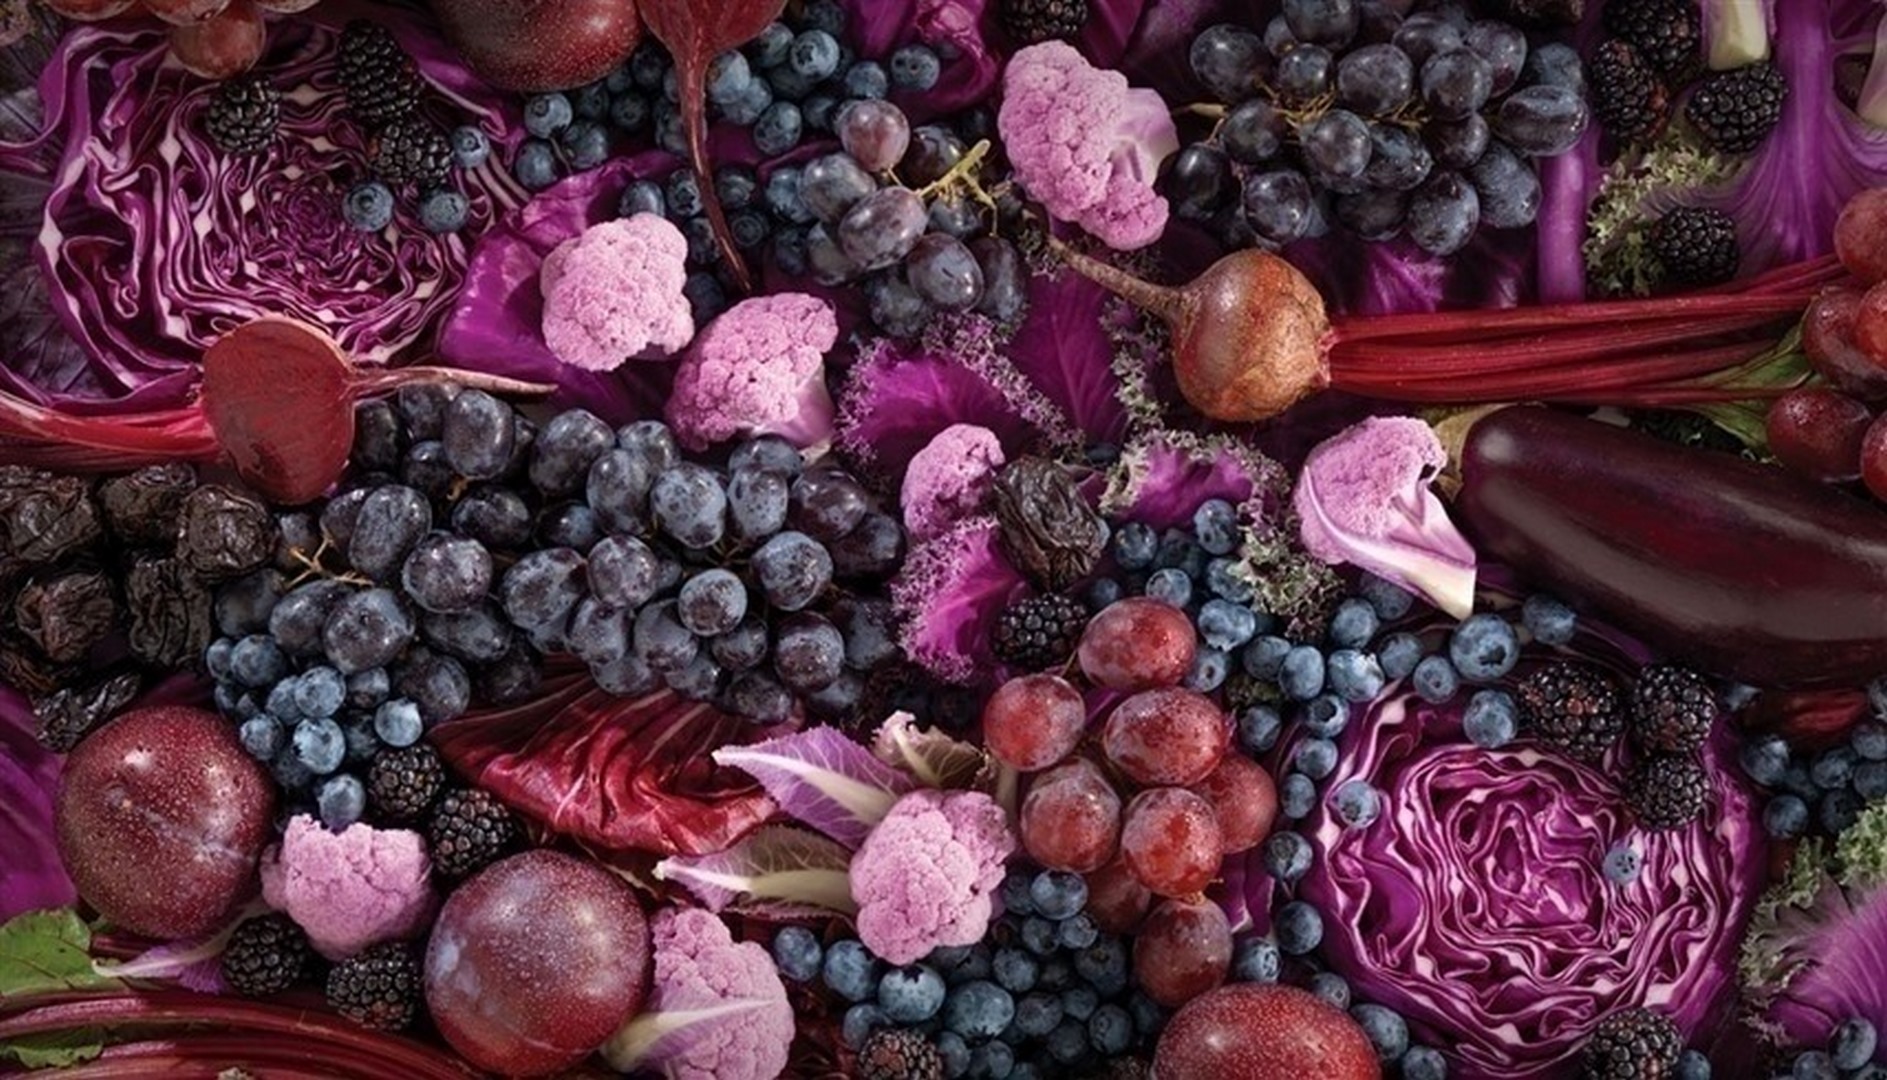 purple foods for party10